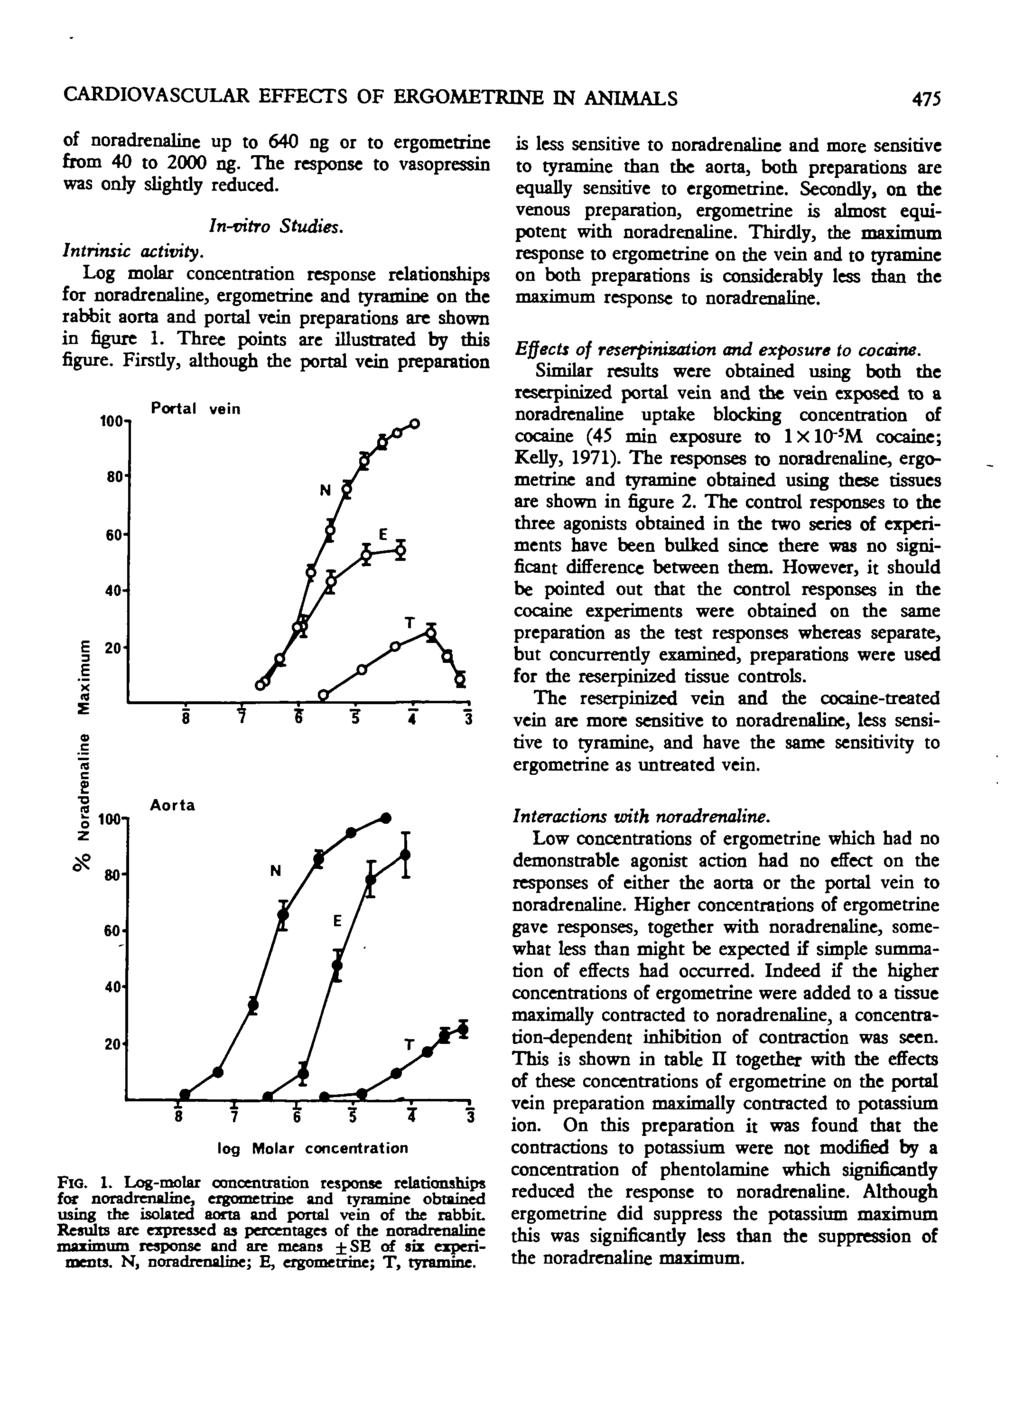 CARDIOVASCULAR EFFECTS OF ERGOMETRINE IN ANIMALS 475 of noradrenaline up to 640 ng or to ergometrine from 40 to 2000 ng. The response to vasopressin was only slightly reduced. In-vitro Studies.